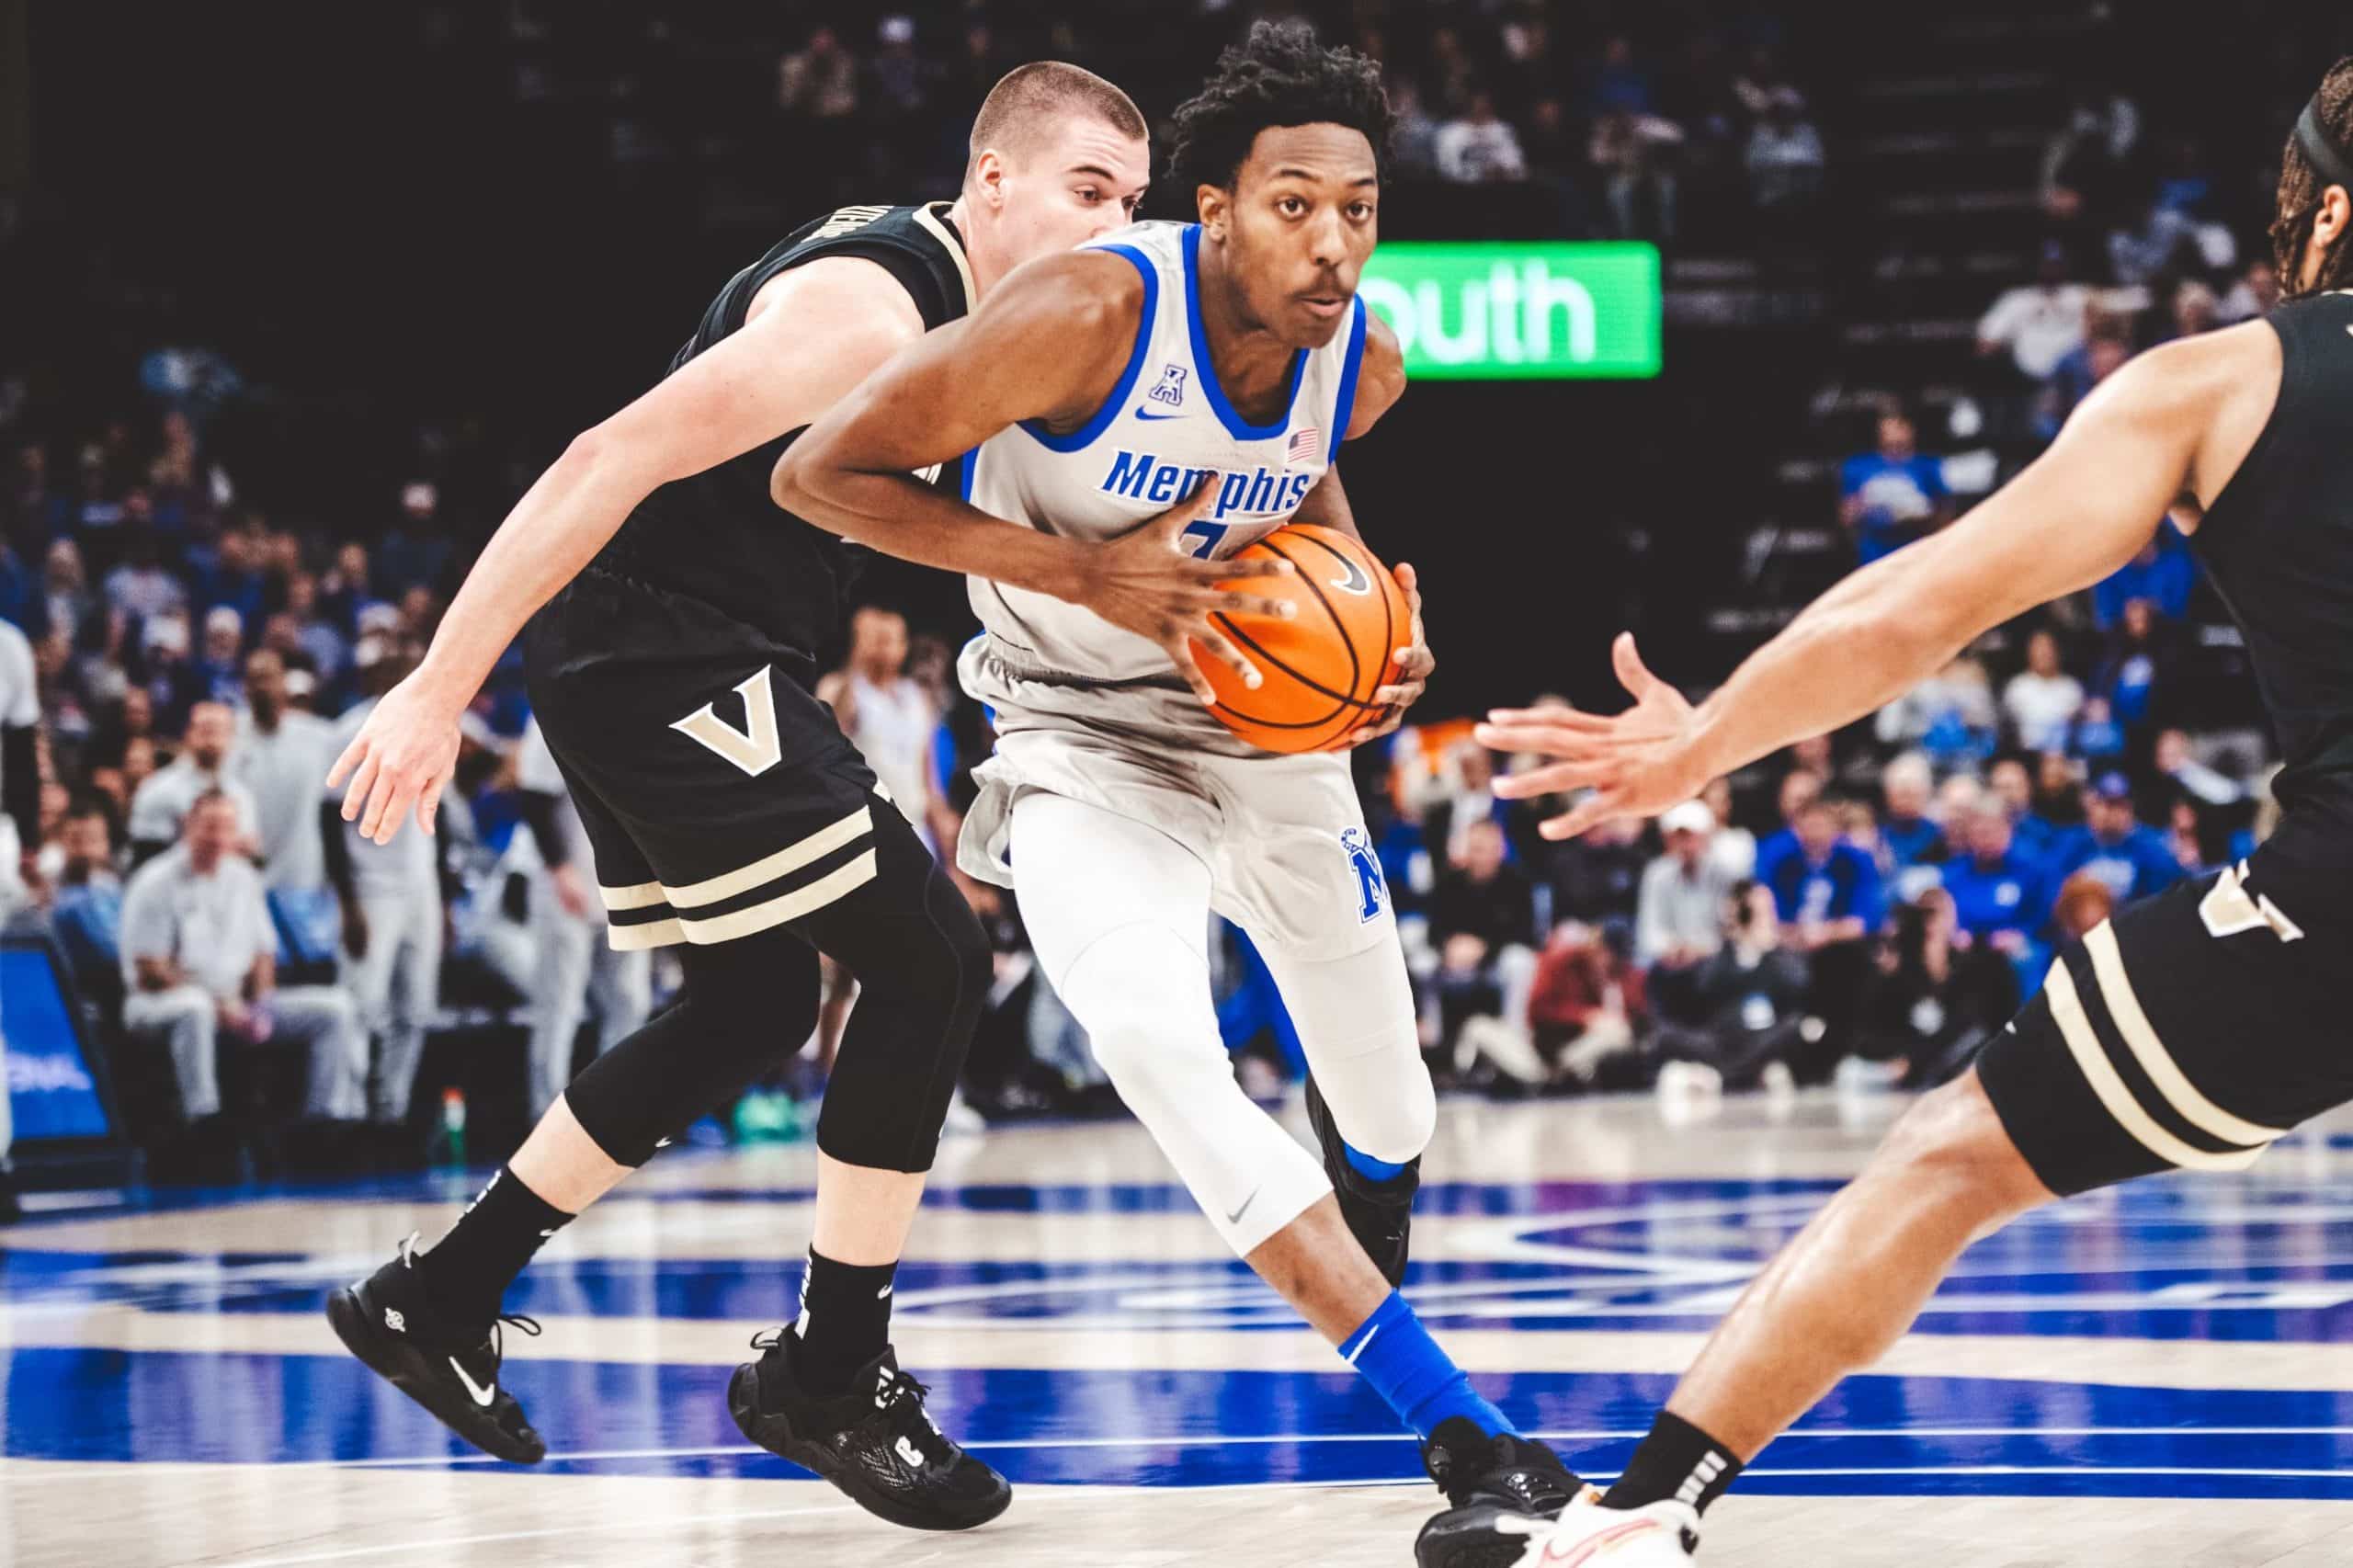 Featured image for “Memphis basketball got taken down to the wire in its final game before Christmas. But the Tigers fought through more than just a feisty Vanderbilt team Saturday afternoon.”